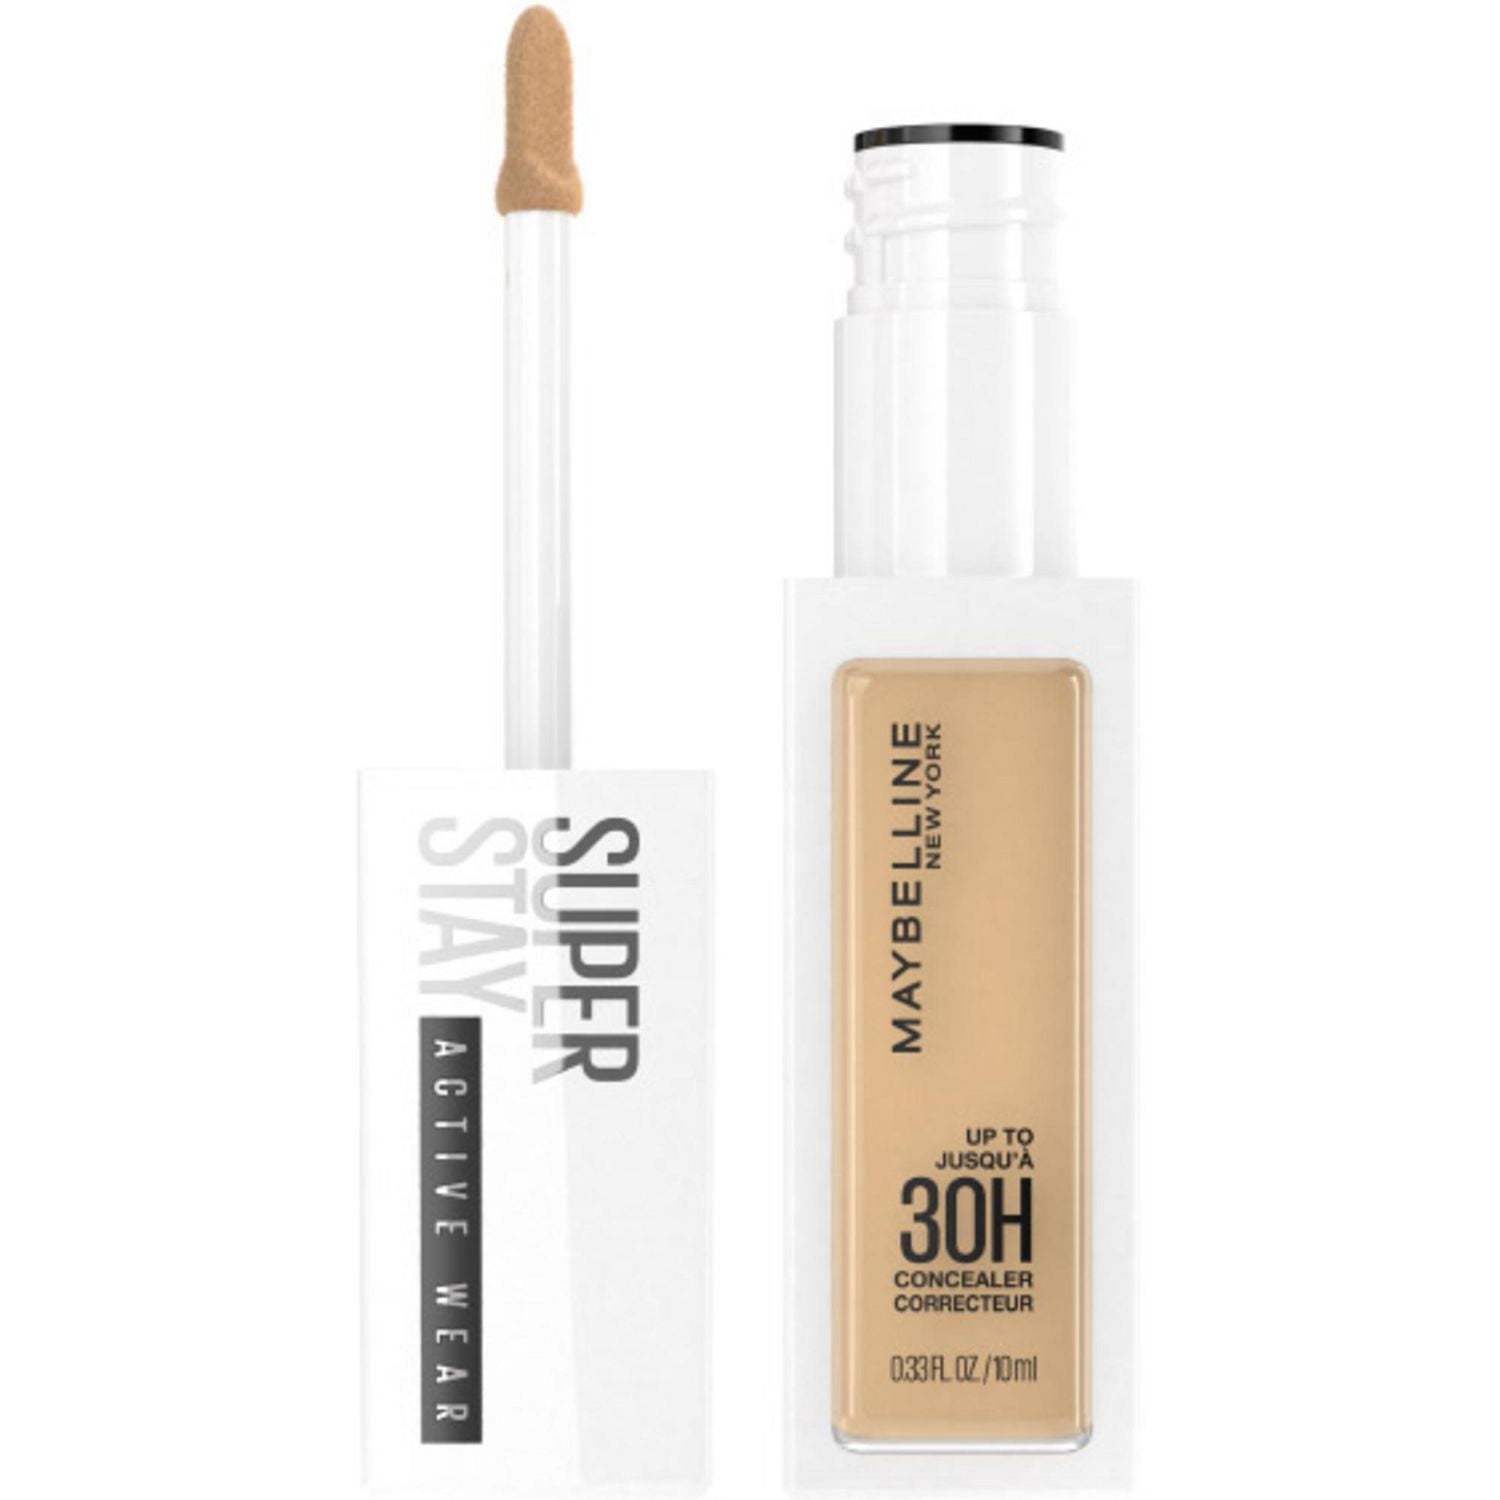 Maybelline New York Longwear Liquid Concealer, Up to 30HR Wear, Shade 01,  10 ml, Super Stay Concealer delivers up to 30H wear. 